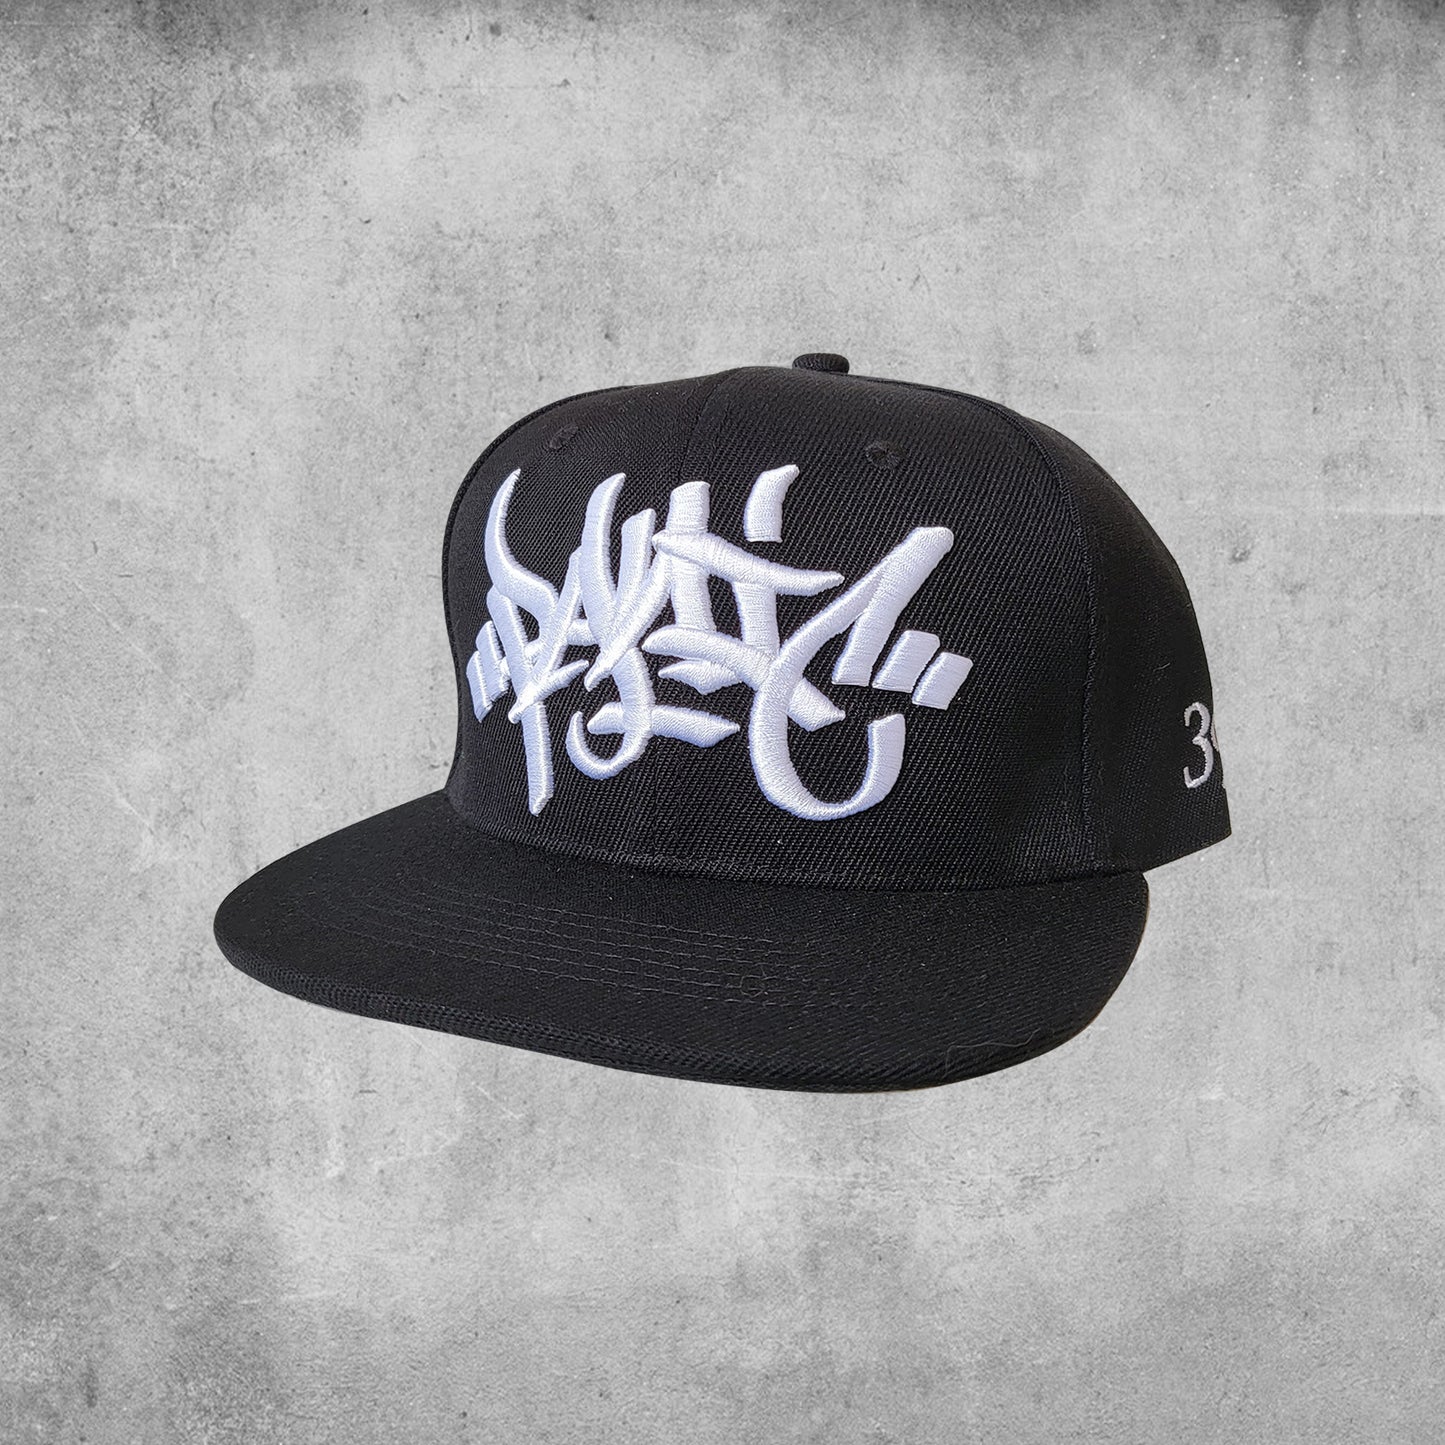 Panic 39 branded snap back hat in black with white puff embroidery.